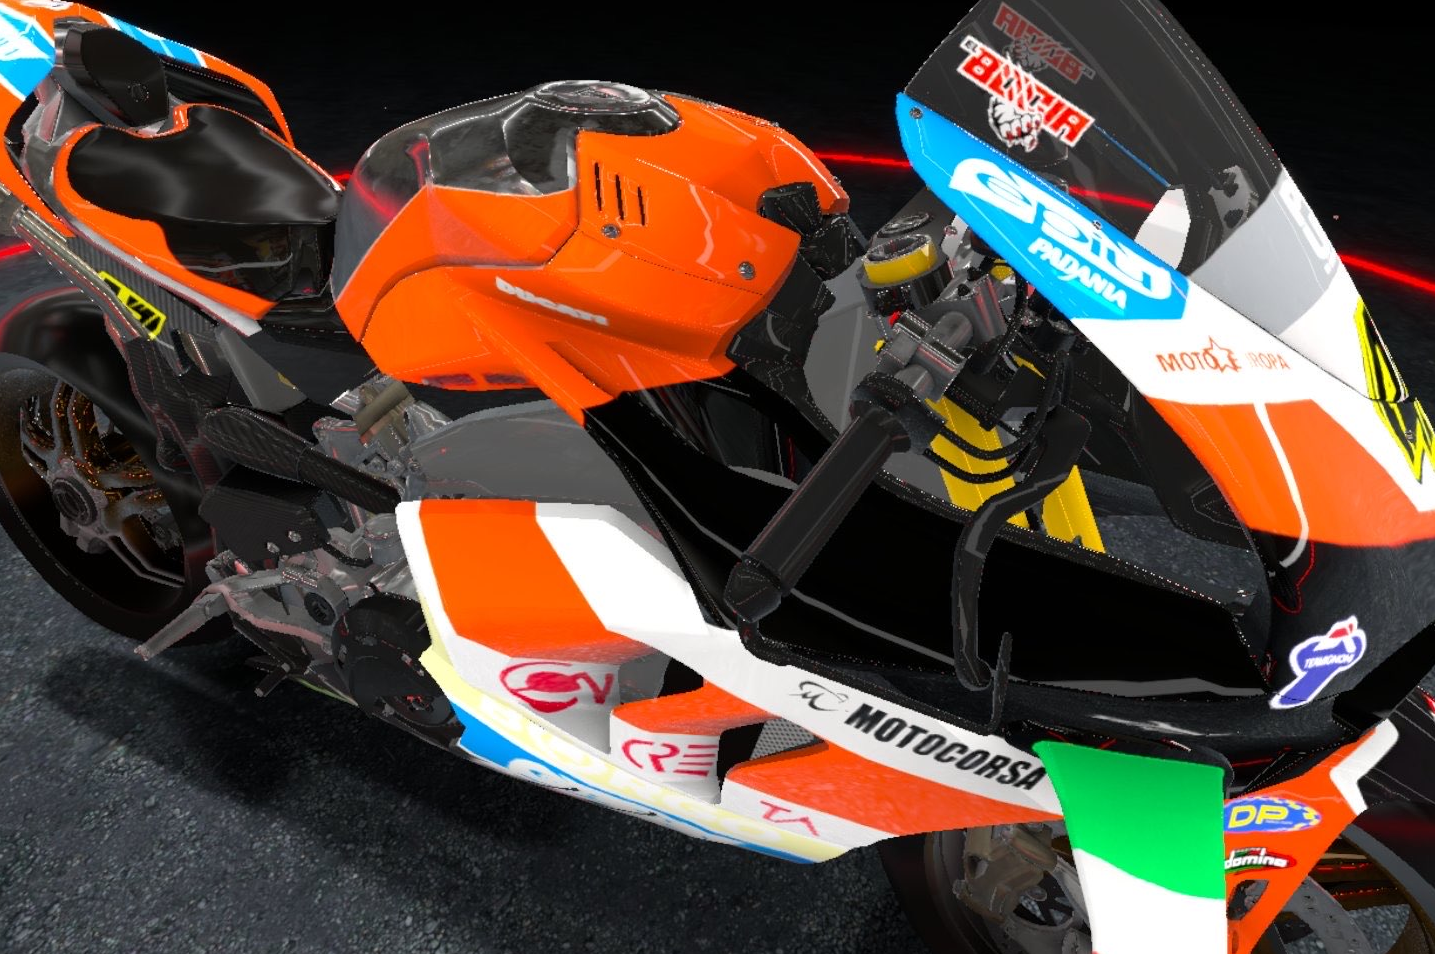 VRIDER screenshot - An orange and white motorbike with lots of advertising labels all over it.